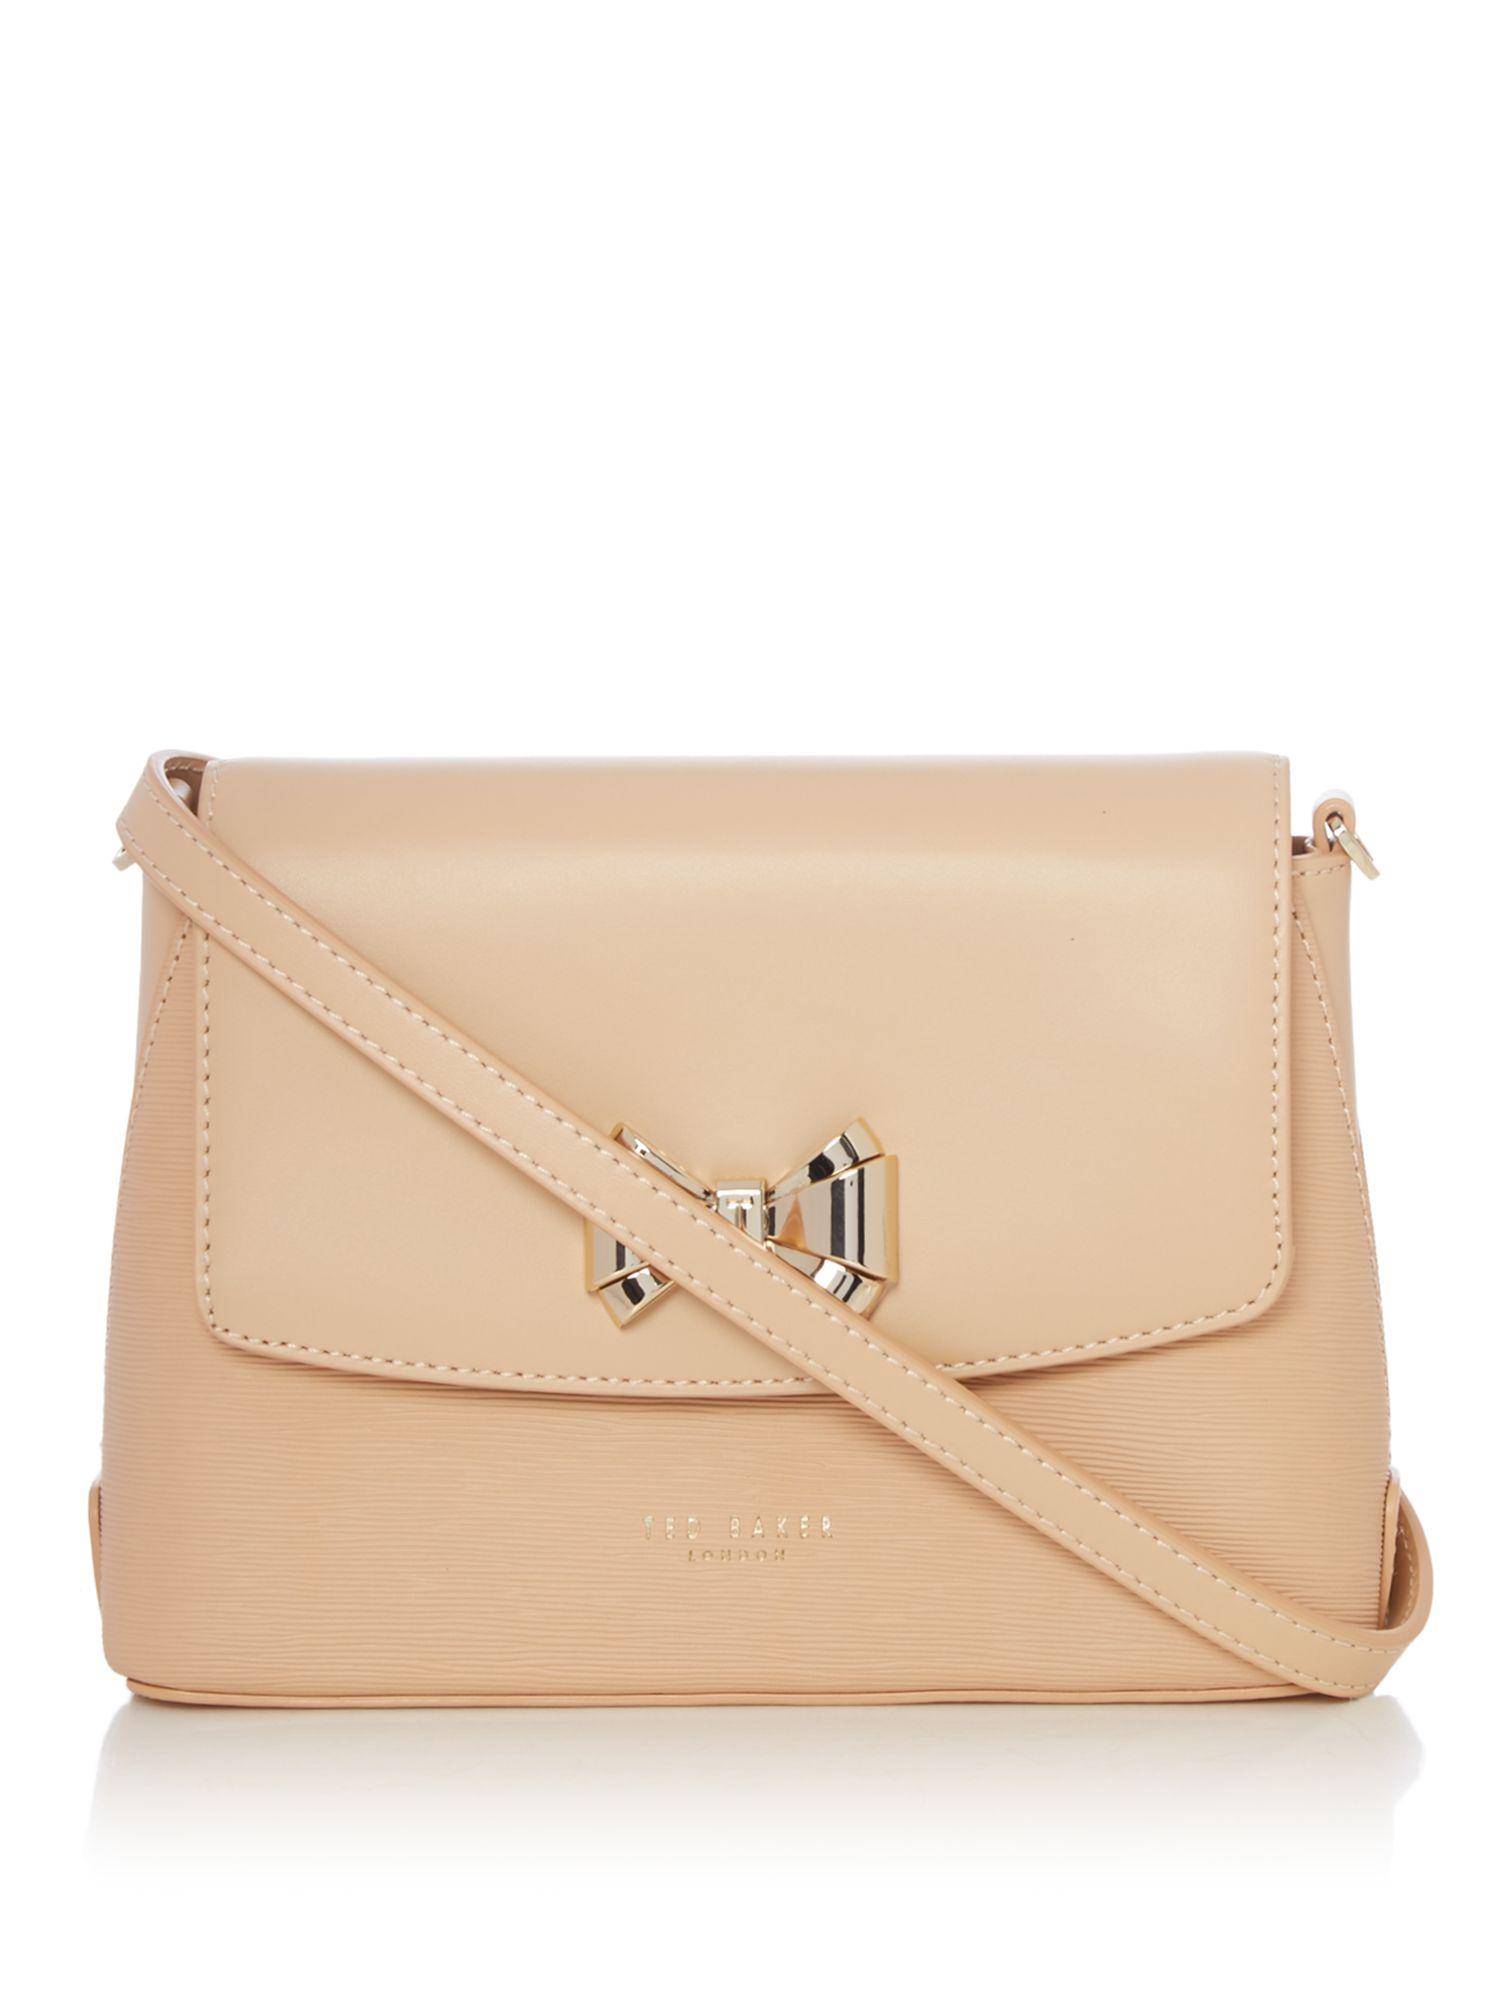 Lyst - Ted Baker Tessi Bow Crossbody Bag in Natural